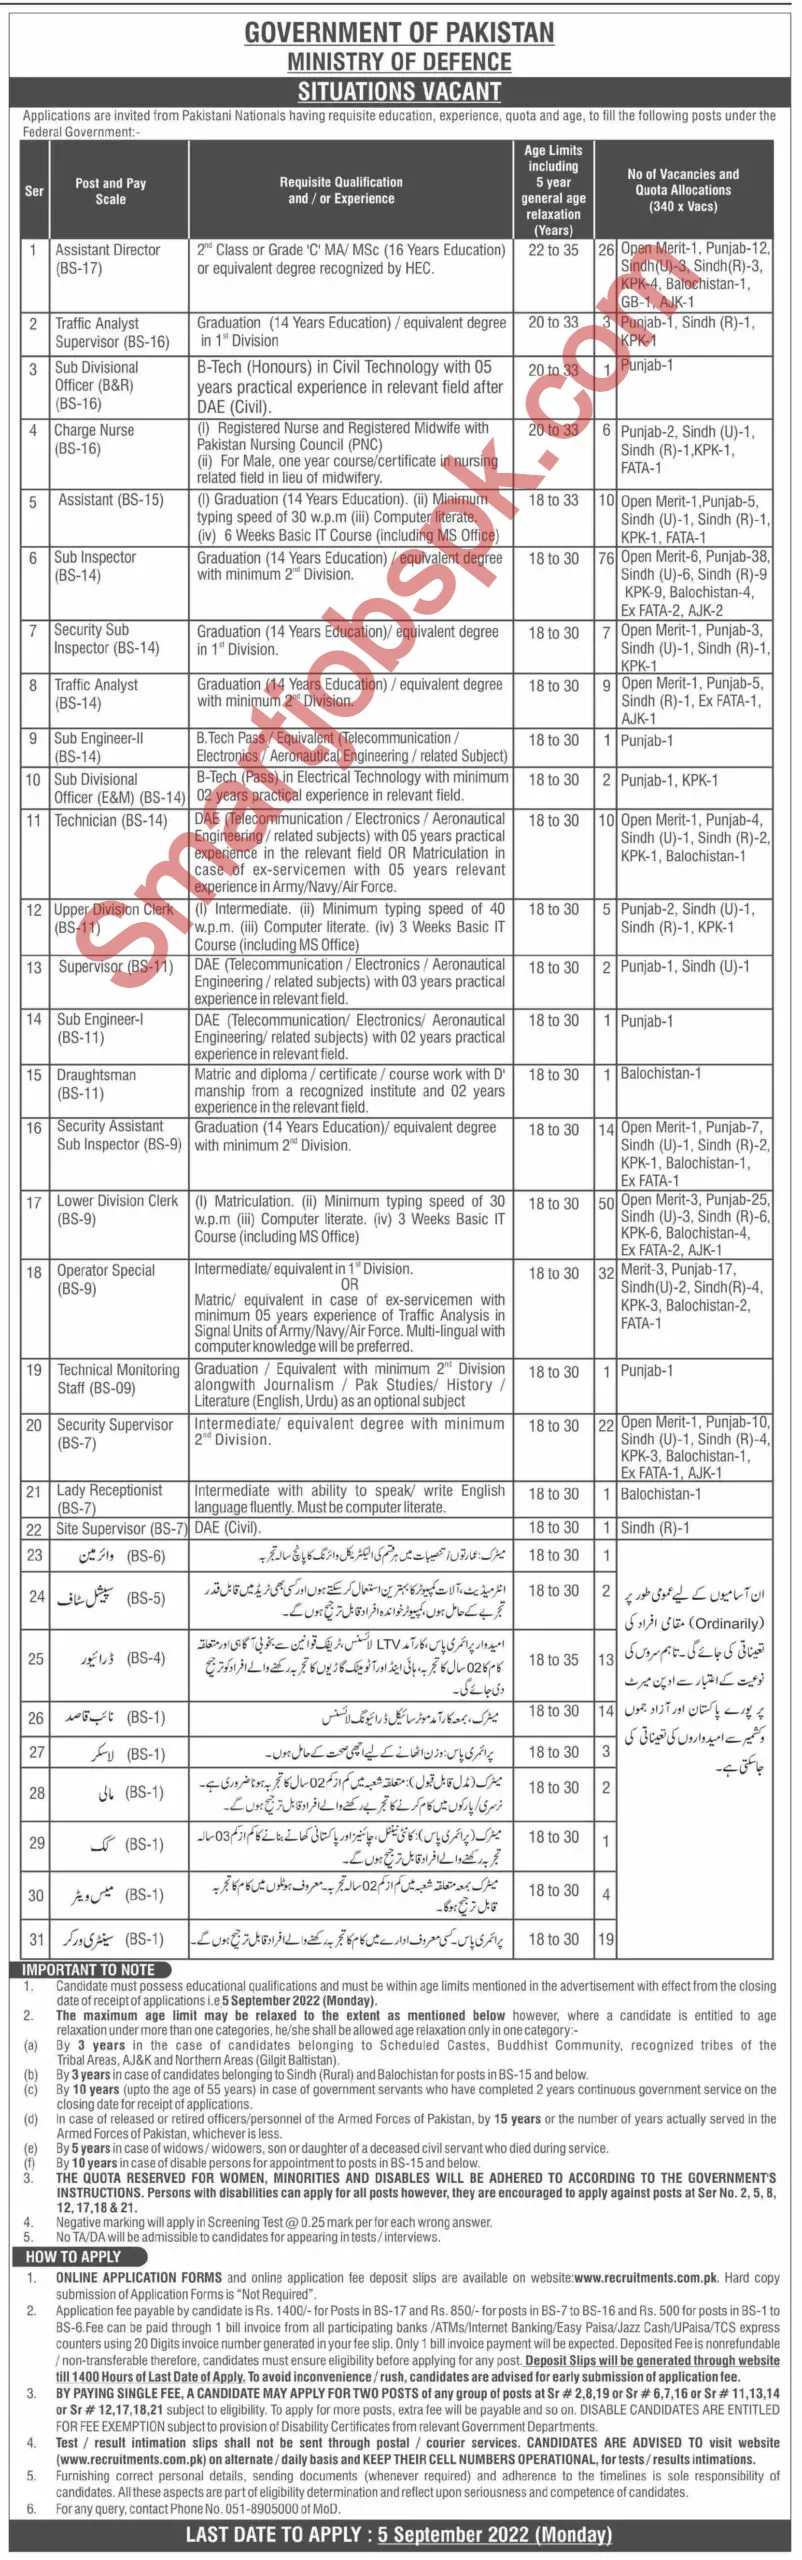 Ministry of Defence Government Jobs 2022 - www.recruitments.com.pk